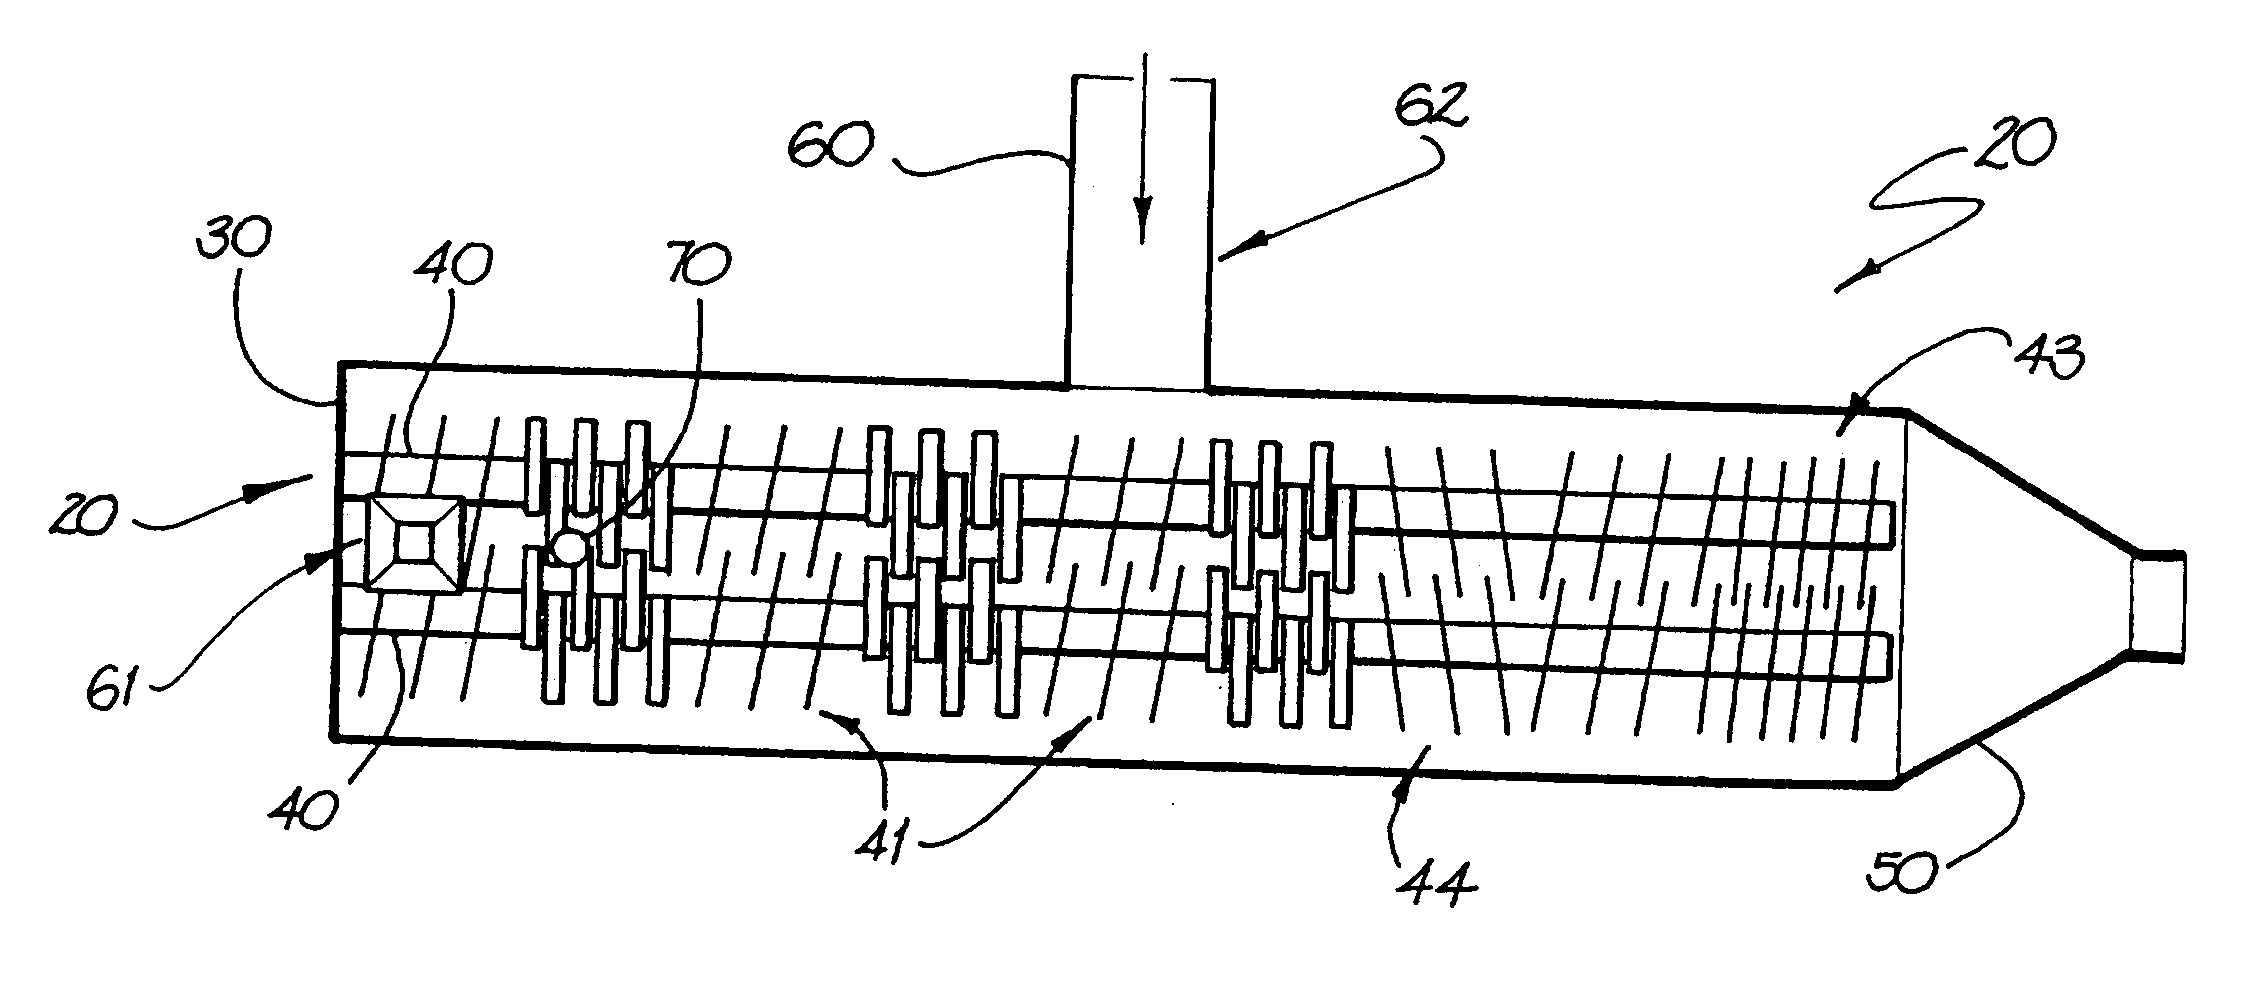 Method and apparatus for extruding cementitious articles